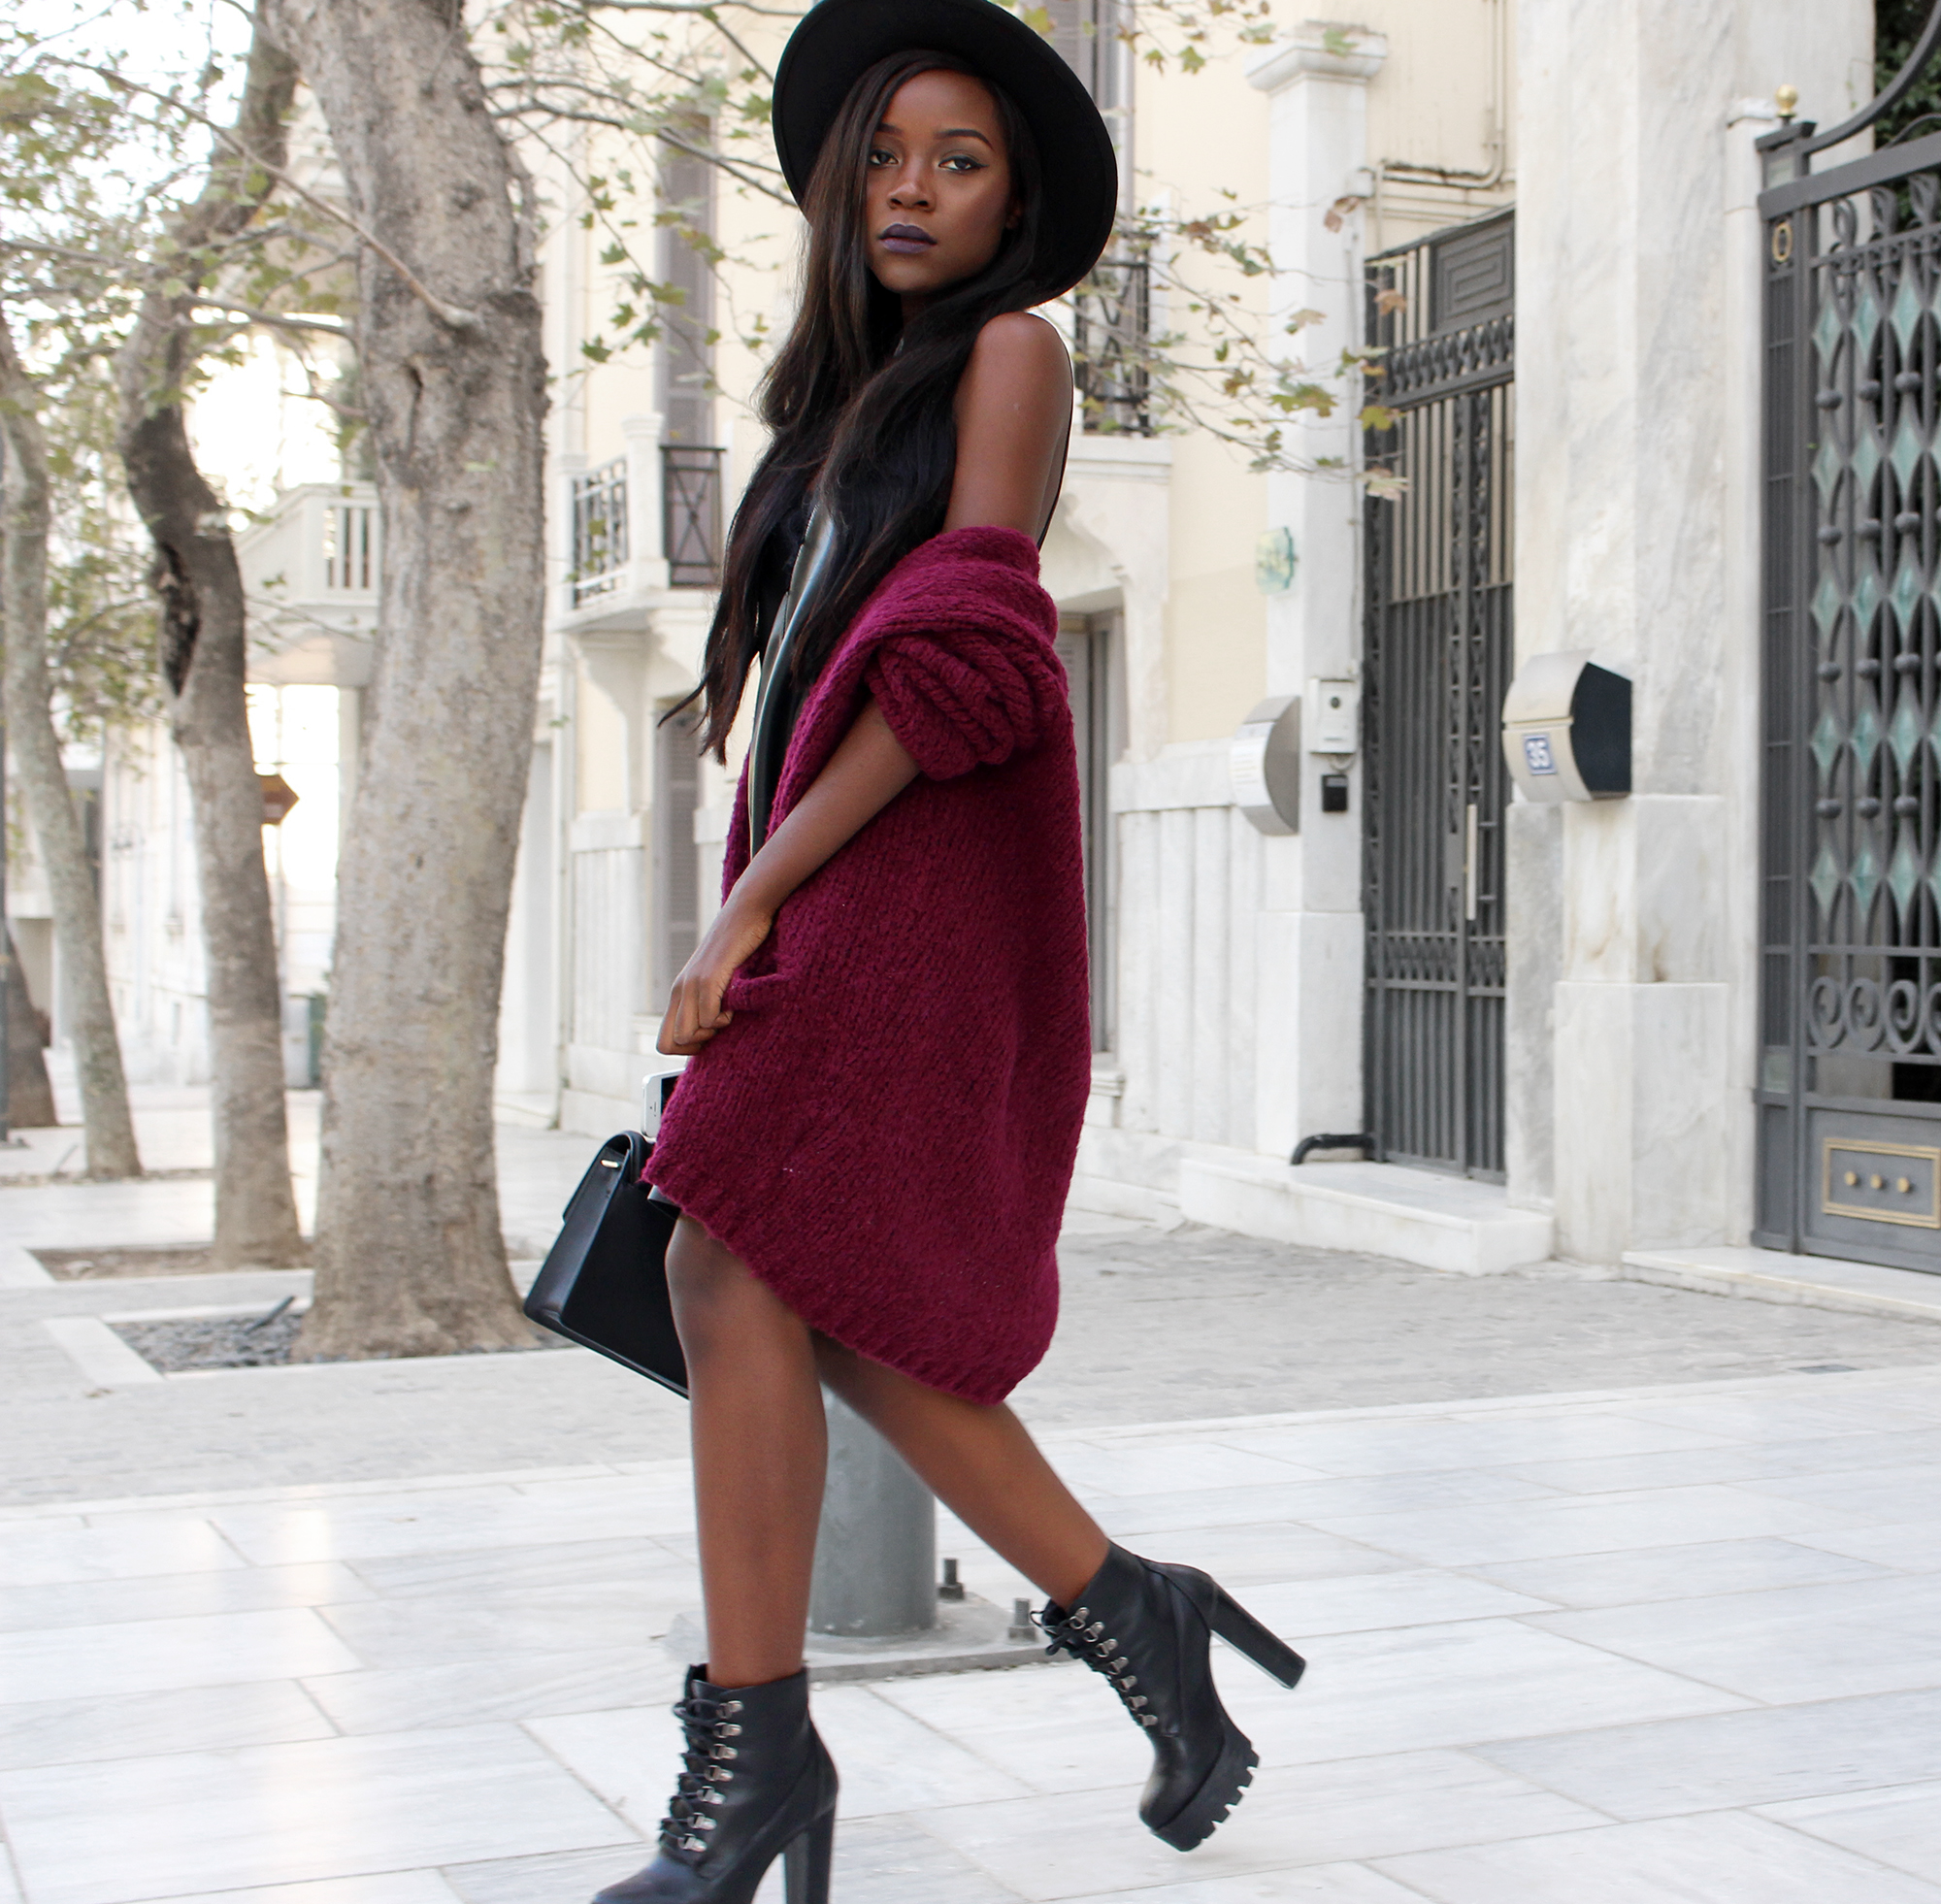 how-to-wear-a-leather-dress